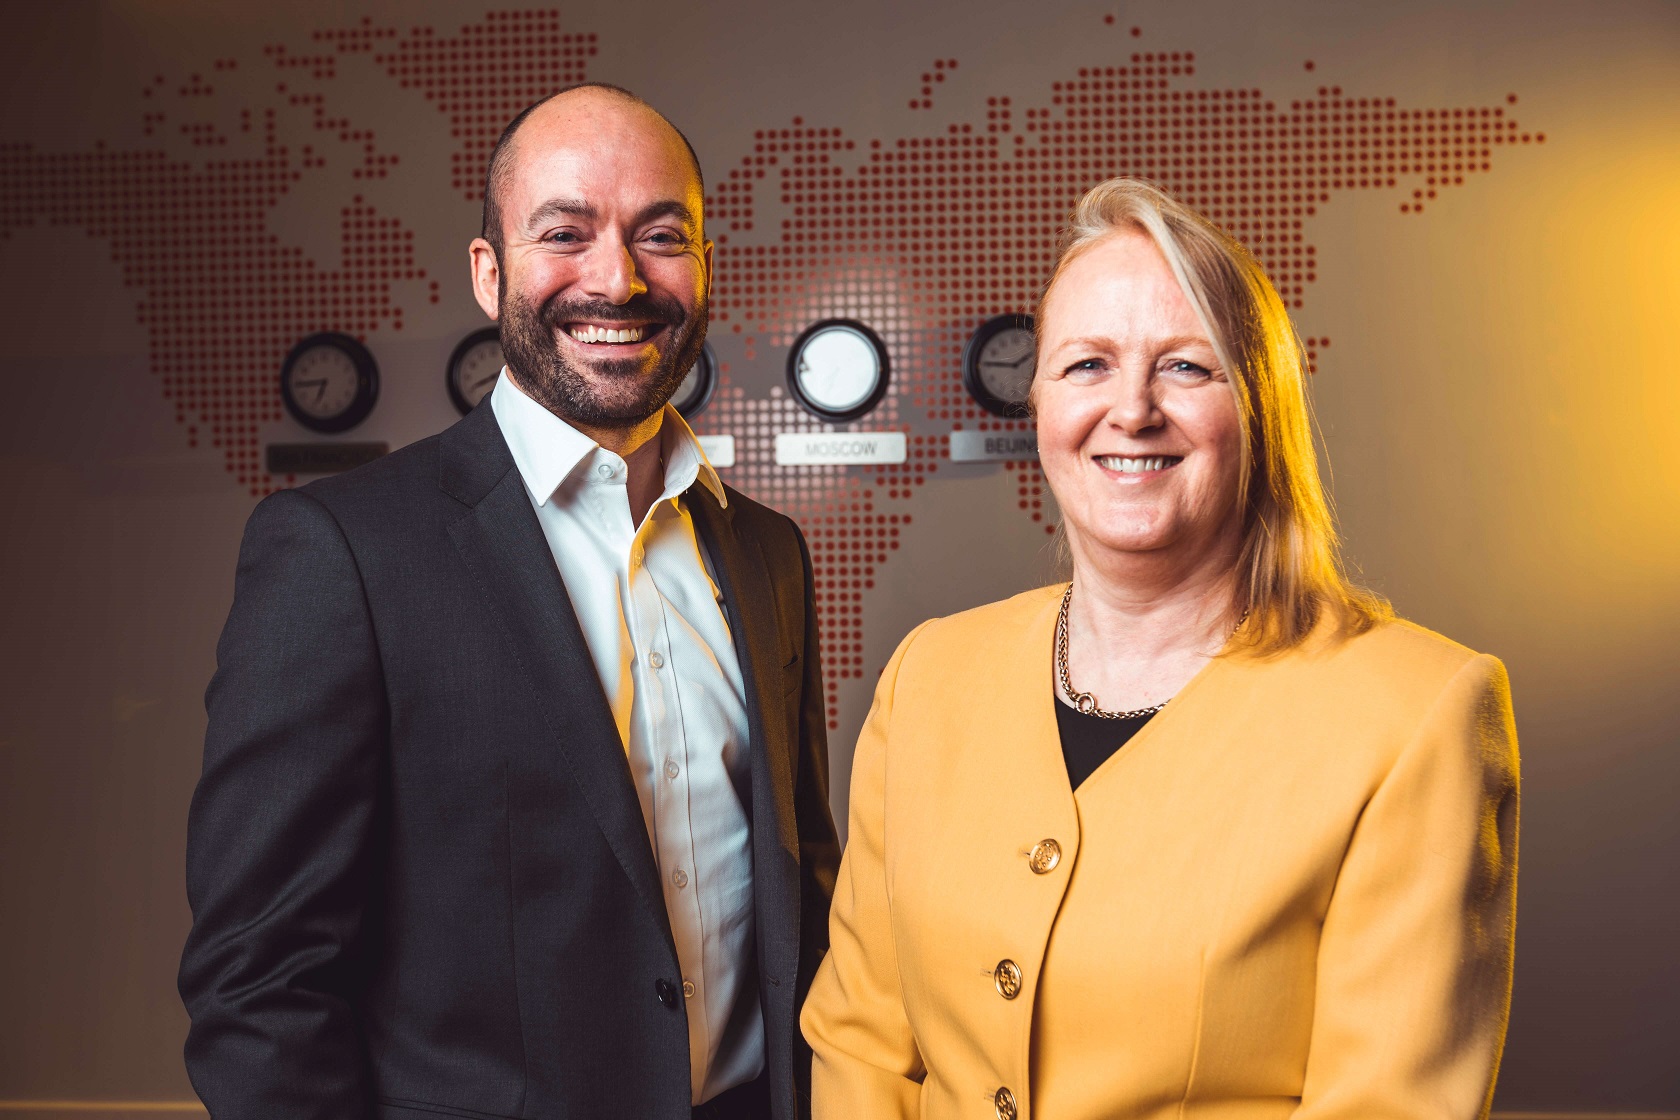 Highlighting IRP Commerce's inclusion in the Fast 50 for the seventh time are Caroline Greer, IRP Commerce Finance Director and Peter Allen, Deloitte Financial Advisory Partner